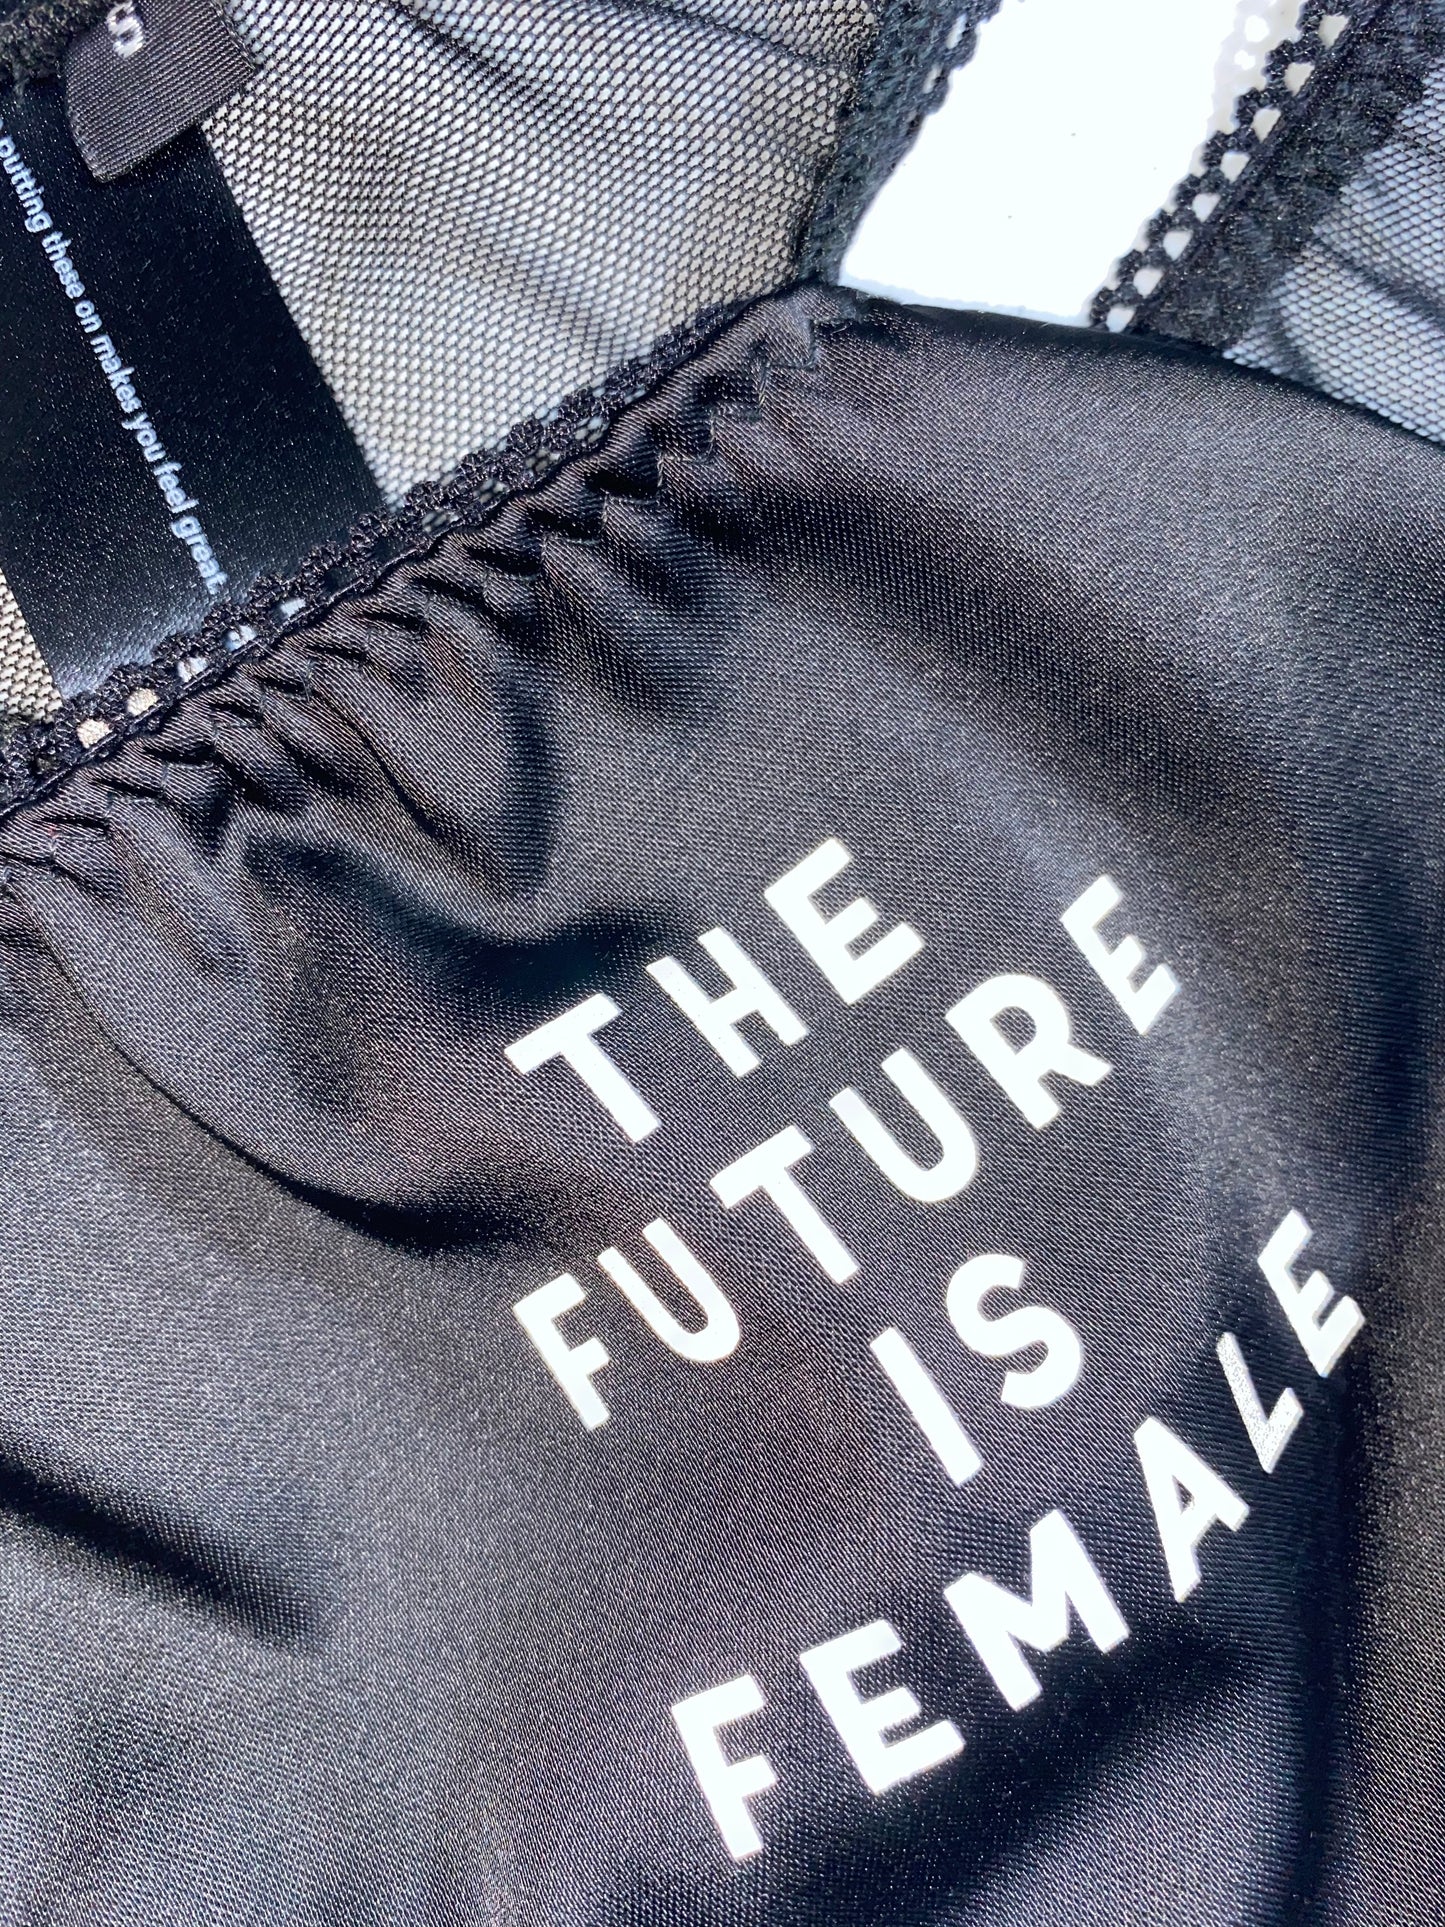 The Future Is Female reflective thong